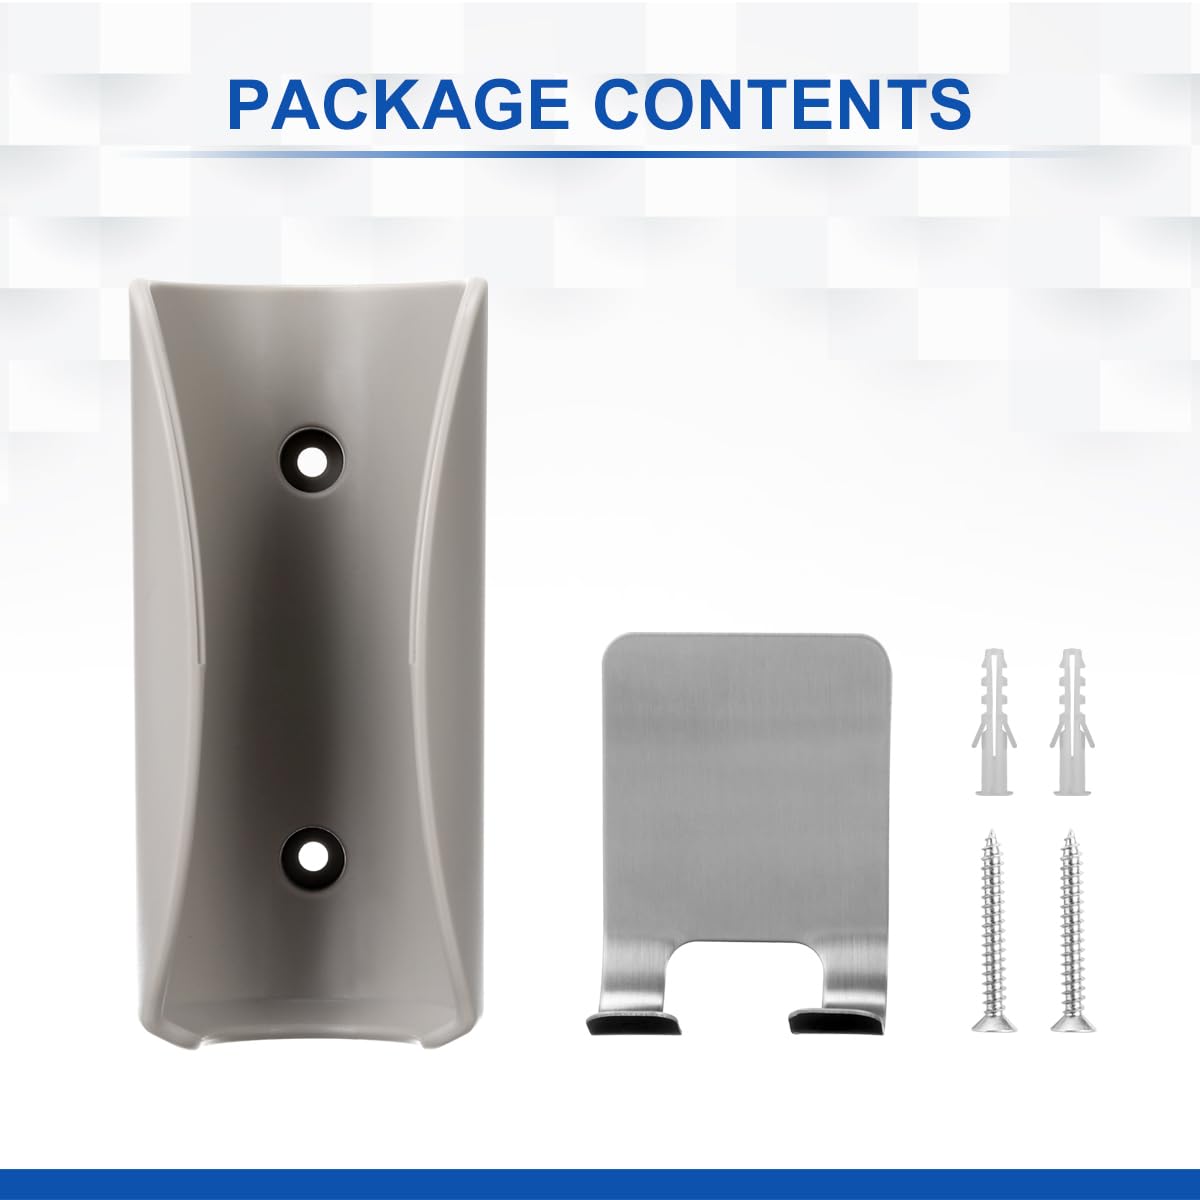 LANMU Hair Dryer Wall Mount Holder package contents